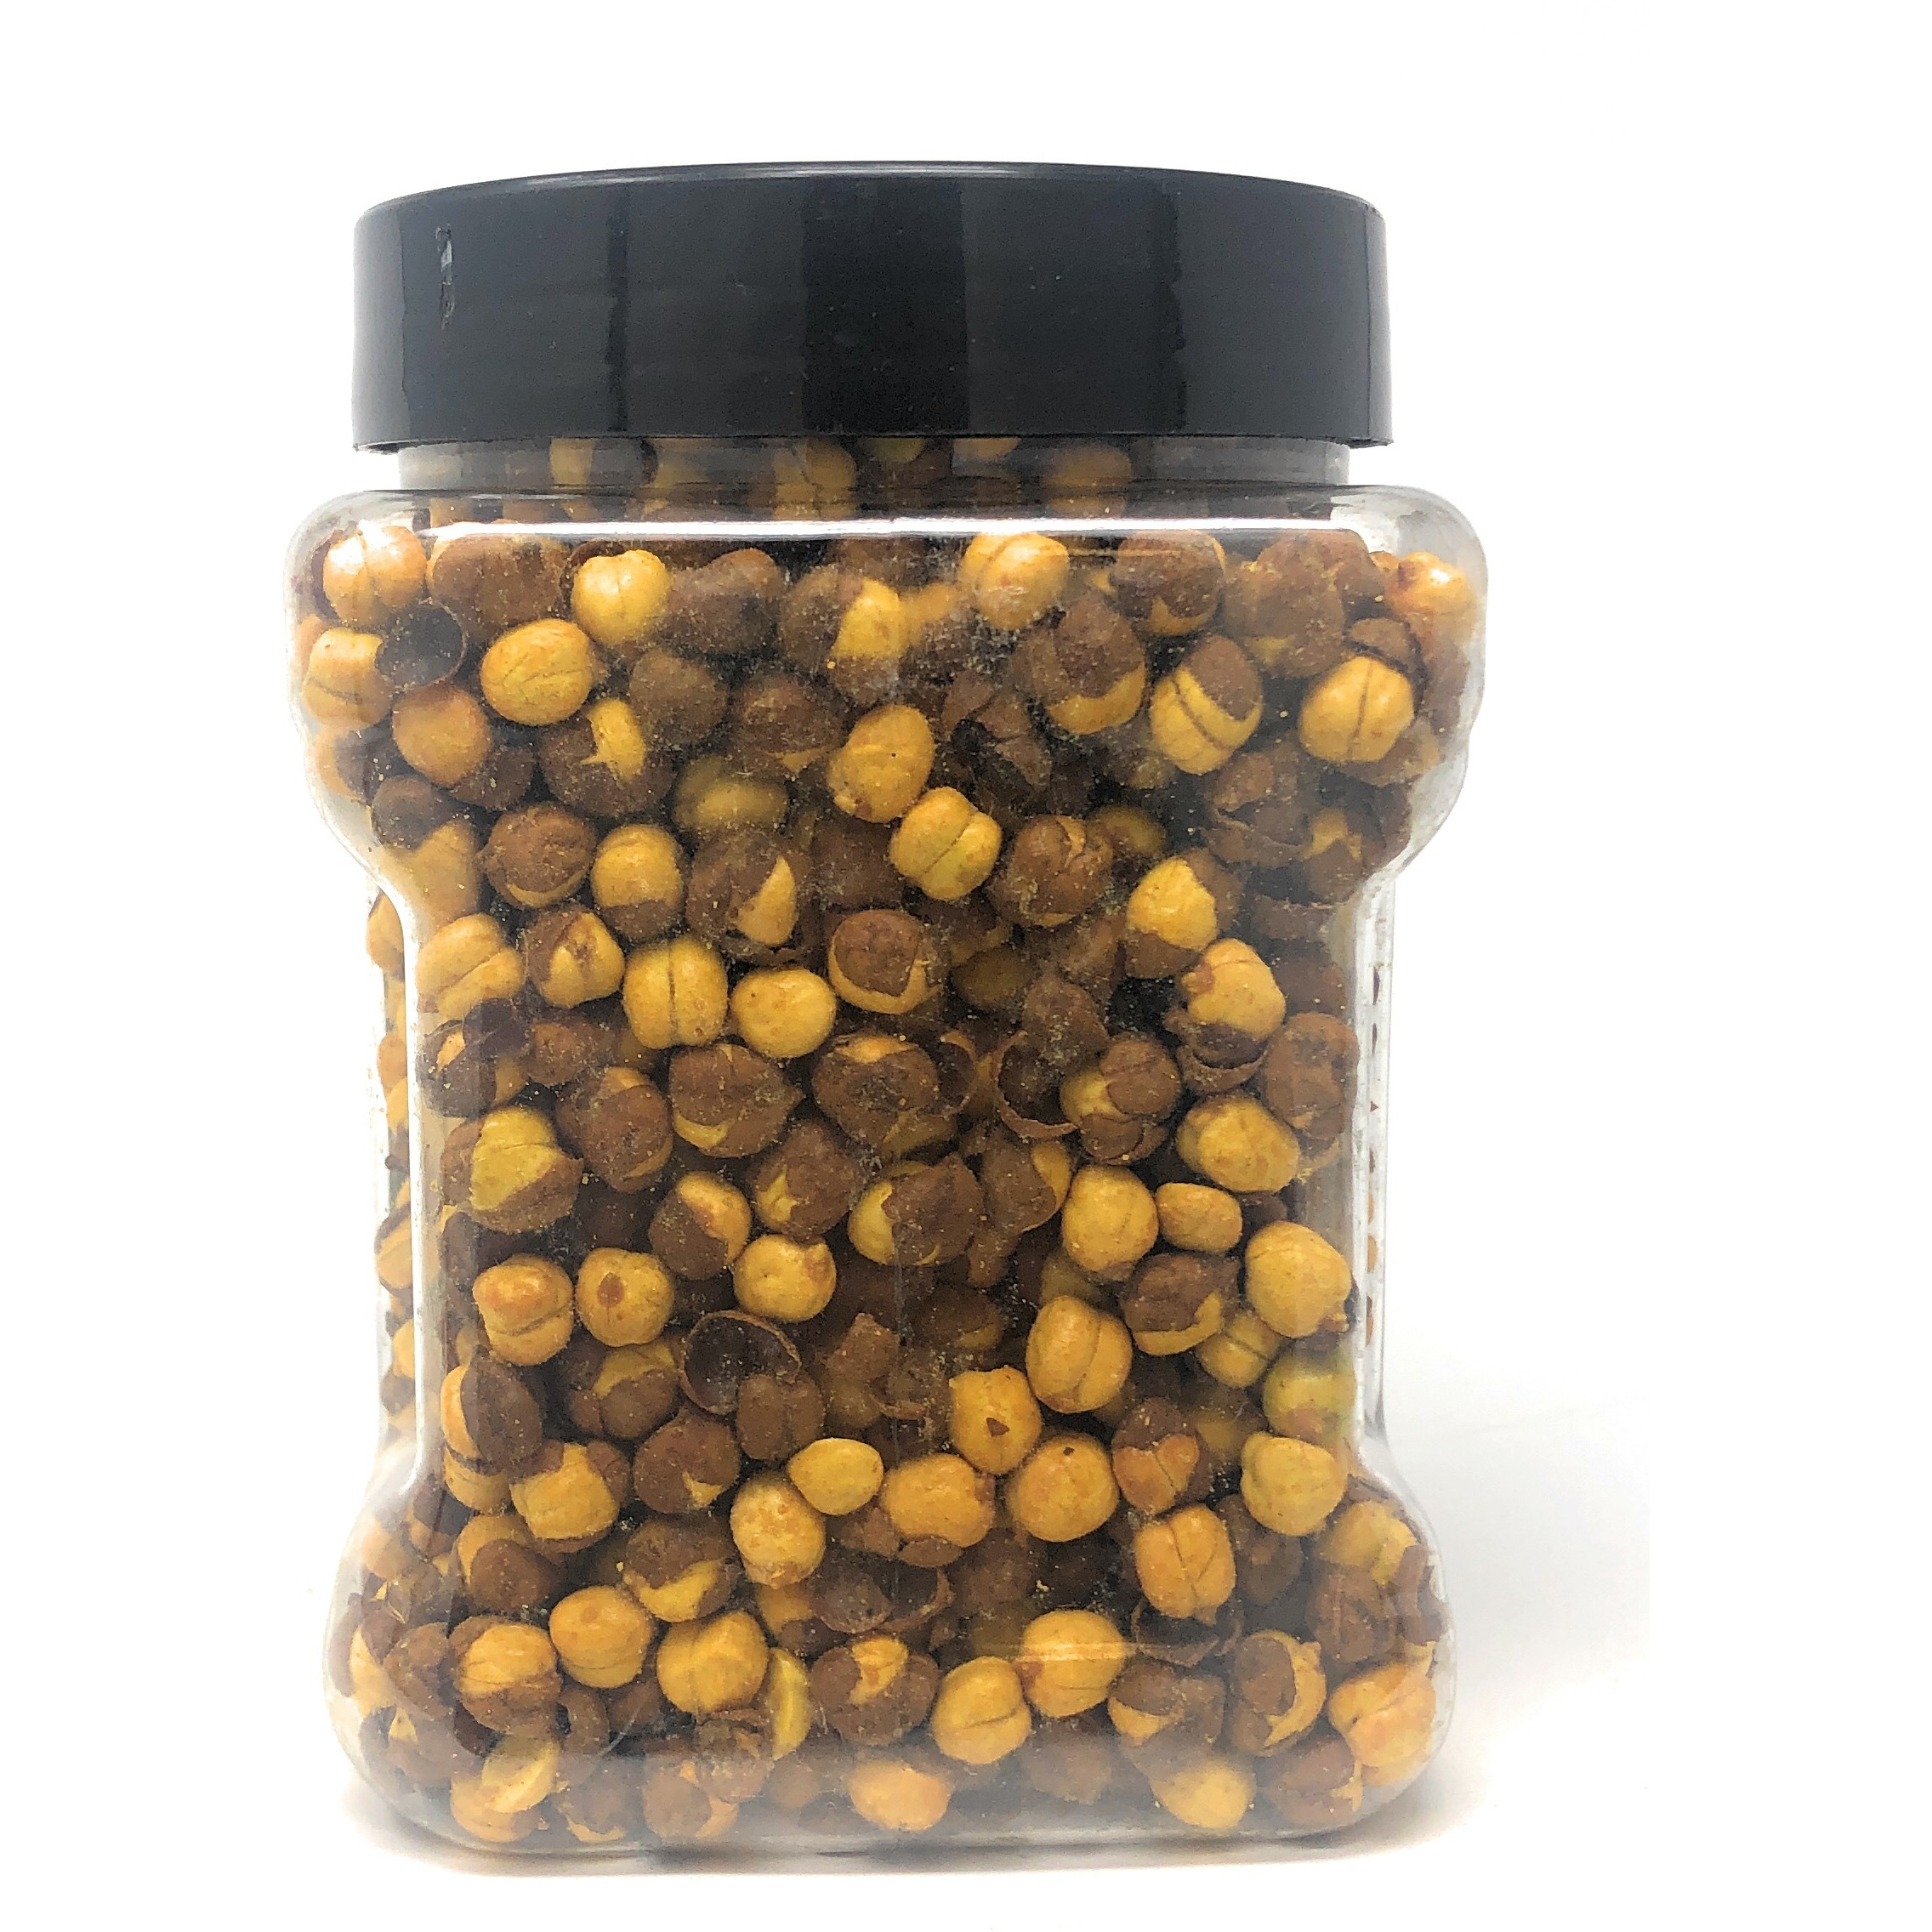 Rani Roasted Chana (Chickpeas) Lime Podina (Mint) Flavor 14oz (400g) ~ All Natural | Vegan | No Preservatives | No Colors | Great Snack, Ready to Eat, Seasoned with 5 Spices, Indian Origin